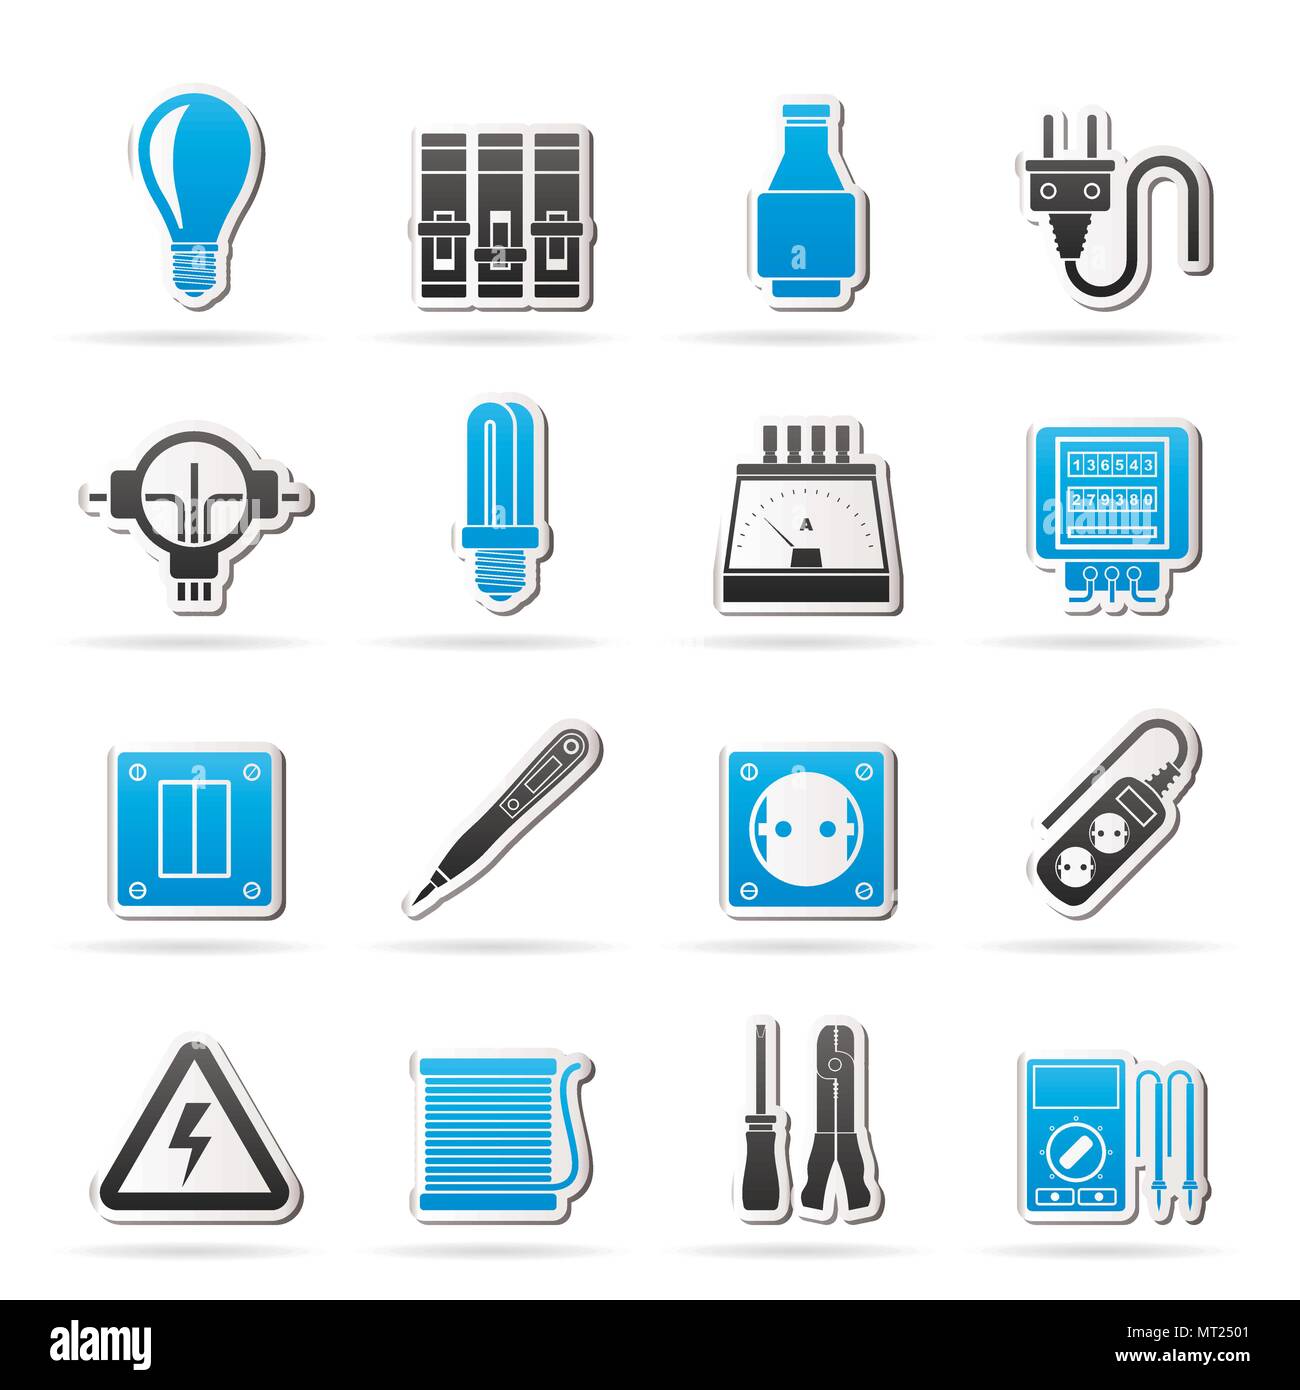 Electrical devices and equipment icons - vector icon set Stock Vector